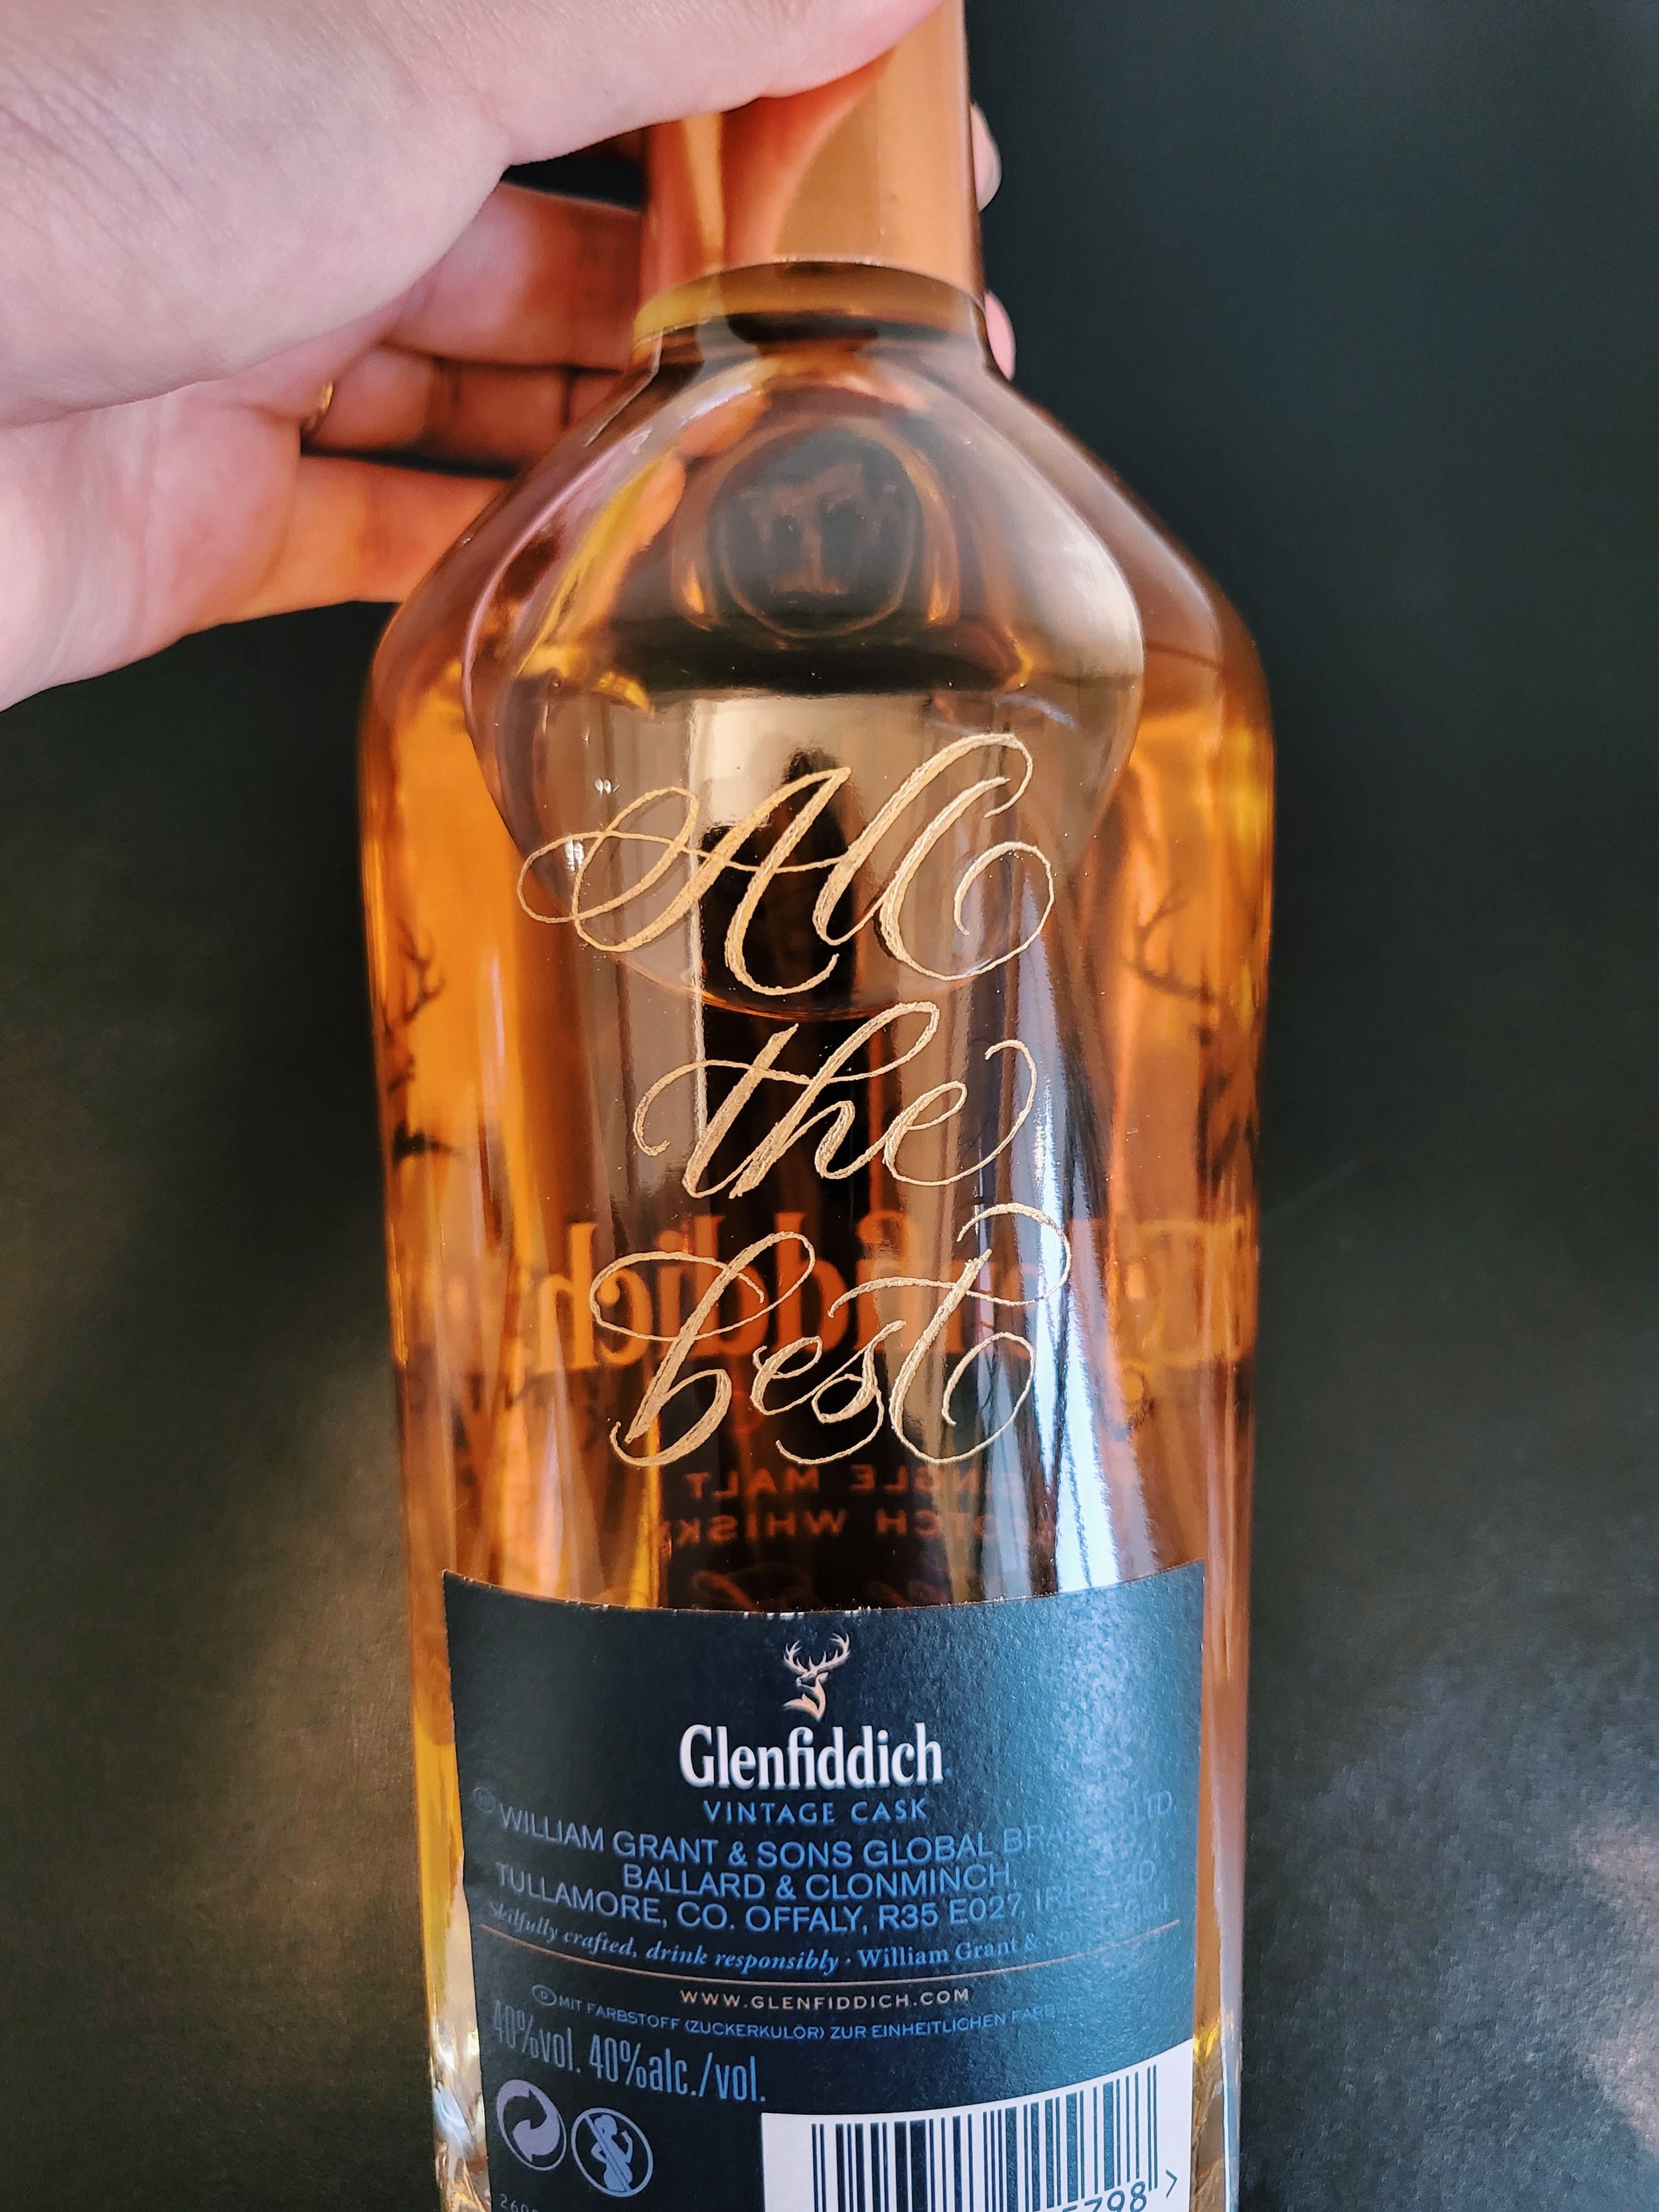 Personalised Glenfiddich Scotch Whisky - All The Best - Calligraphy Engraving - Farewell Gift